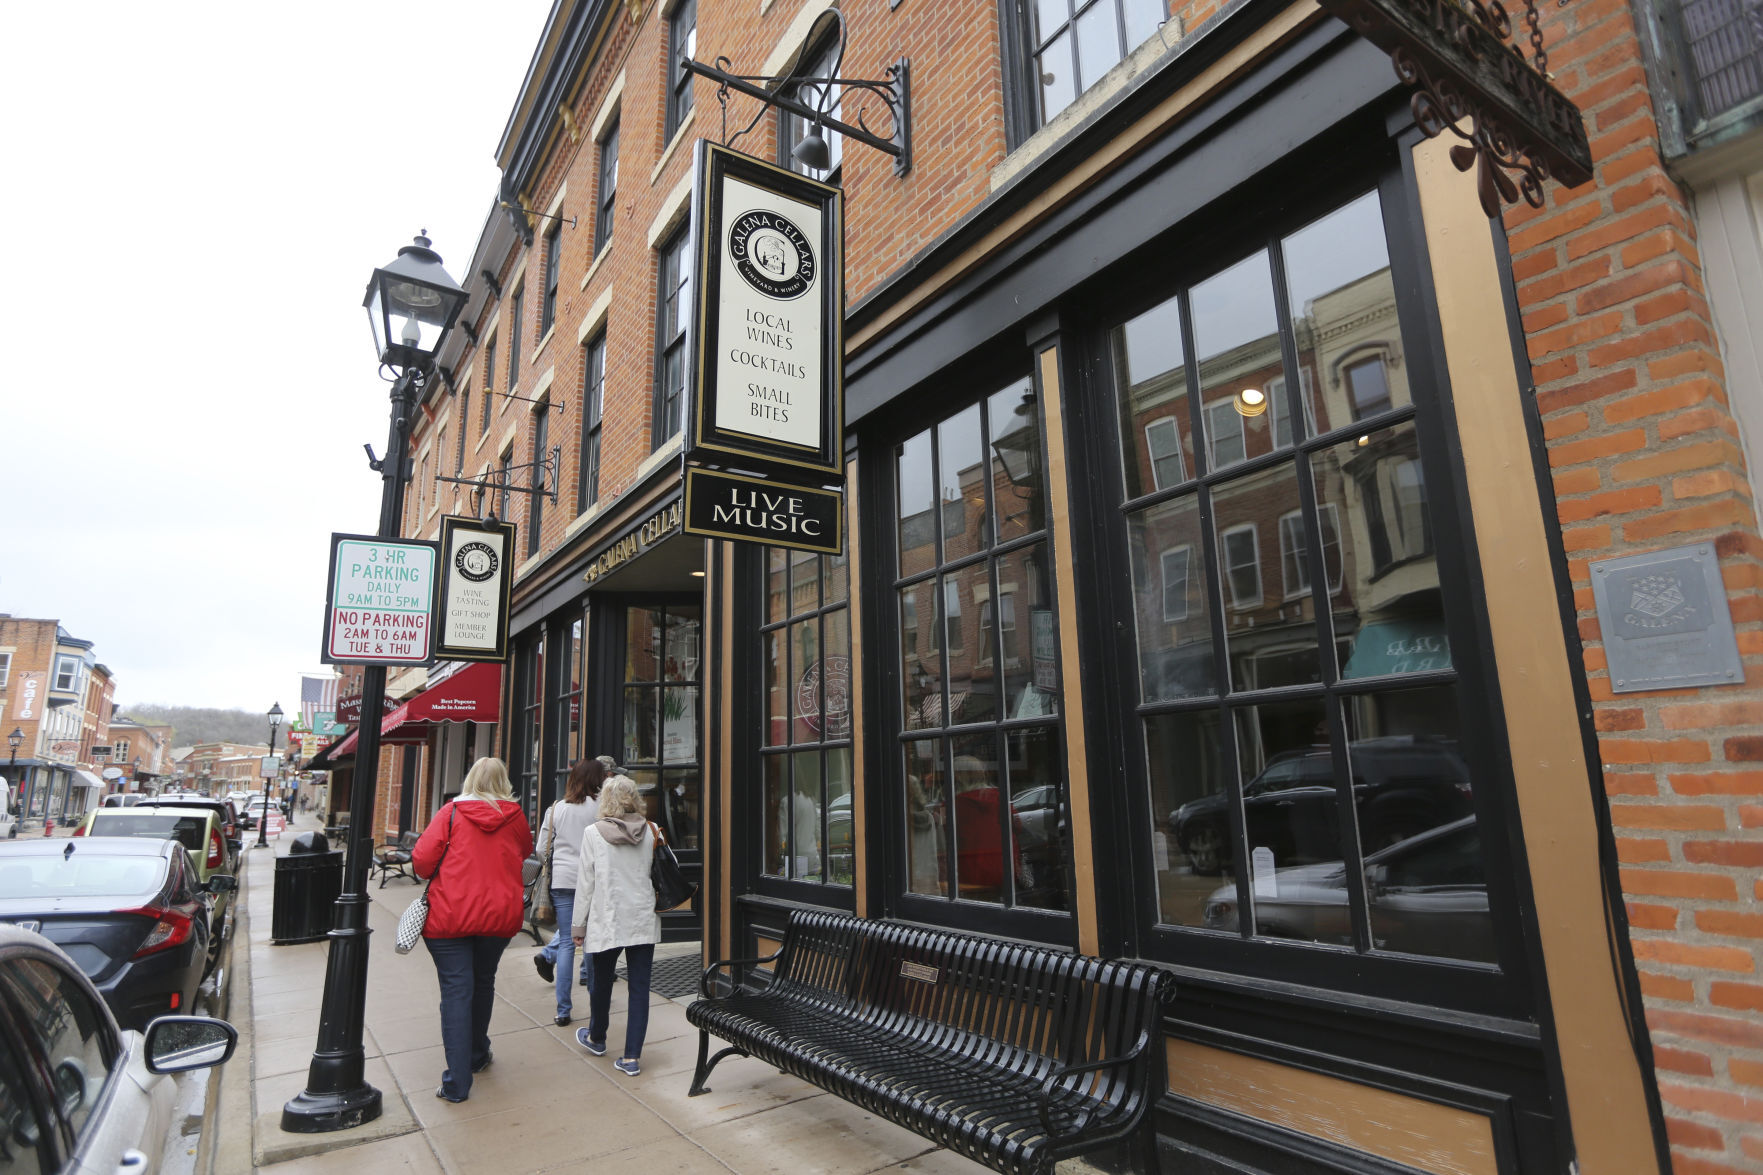 Galena Cellars recently relocated to 111 N. Main St. in Galena, Ill.    PHOTO CREDIT: Dave Kettering